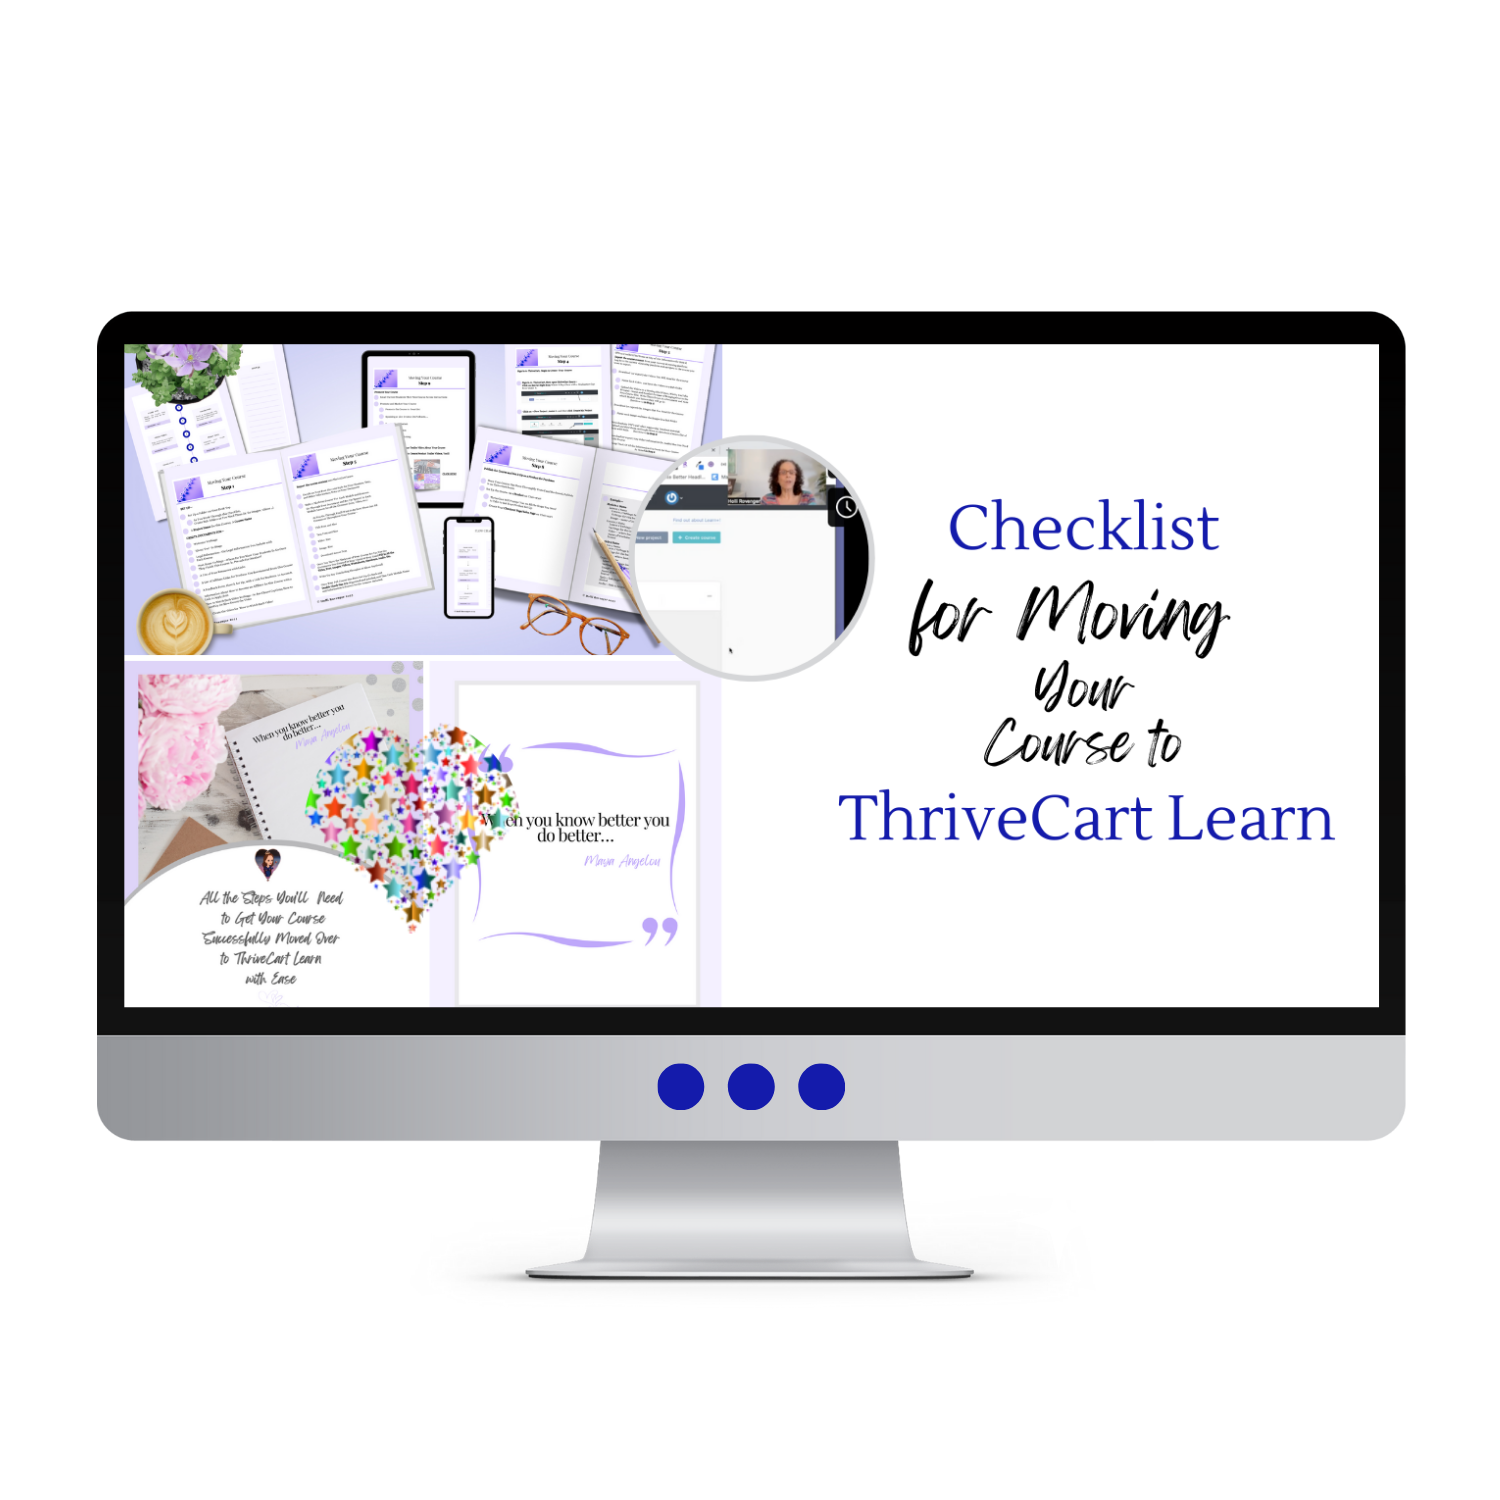 Checklist to Move Your Course to ThriveCart Learn